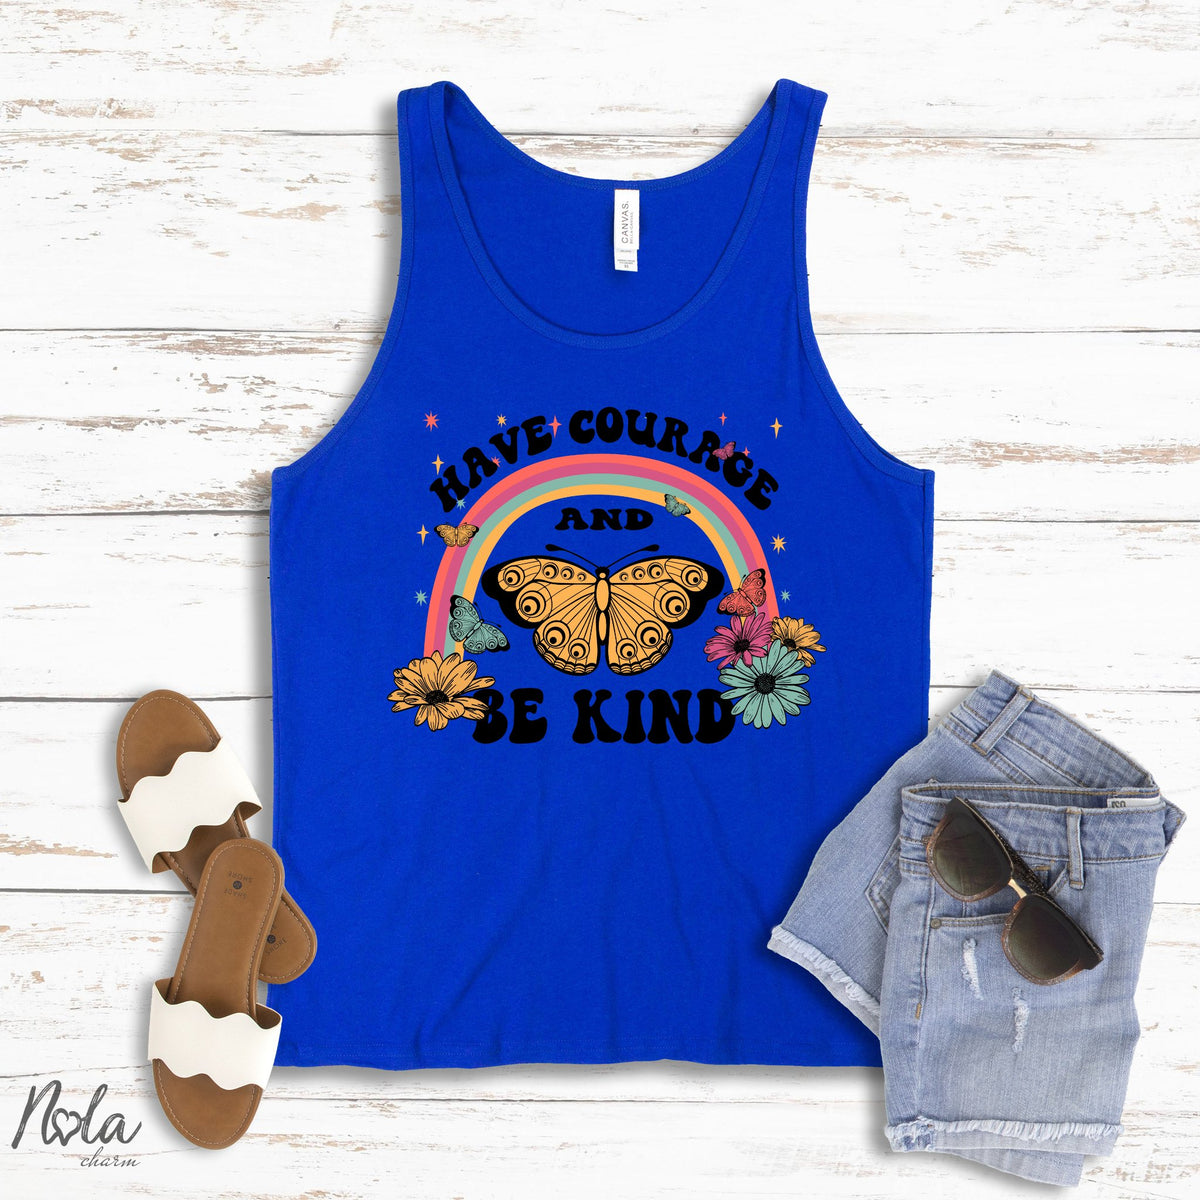 Have Courage And Be Kind - Nola Charm